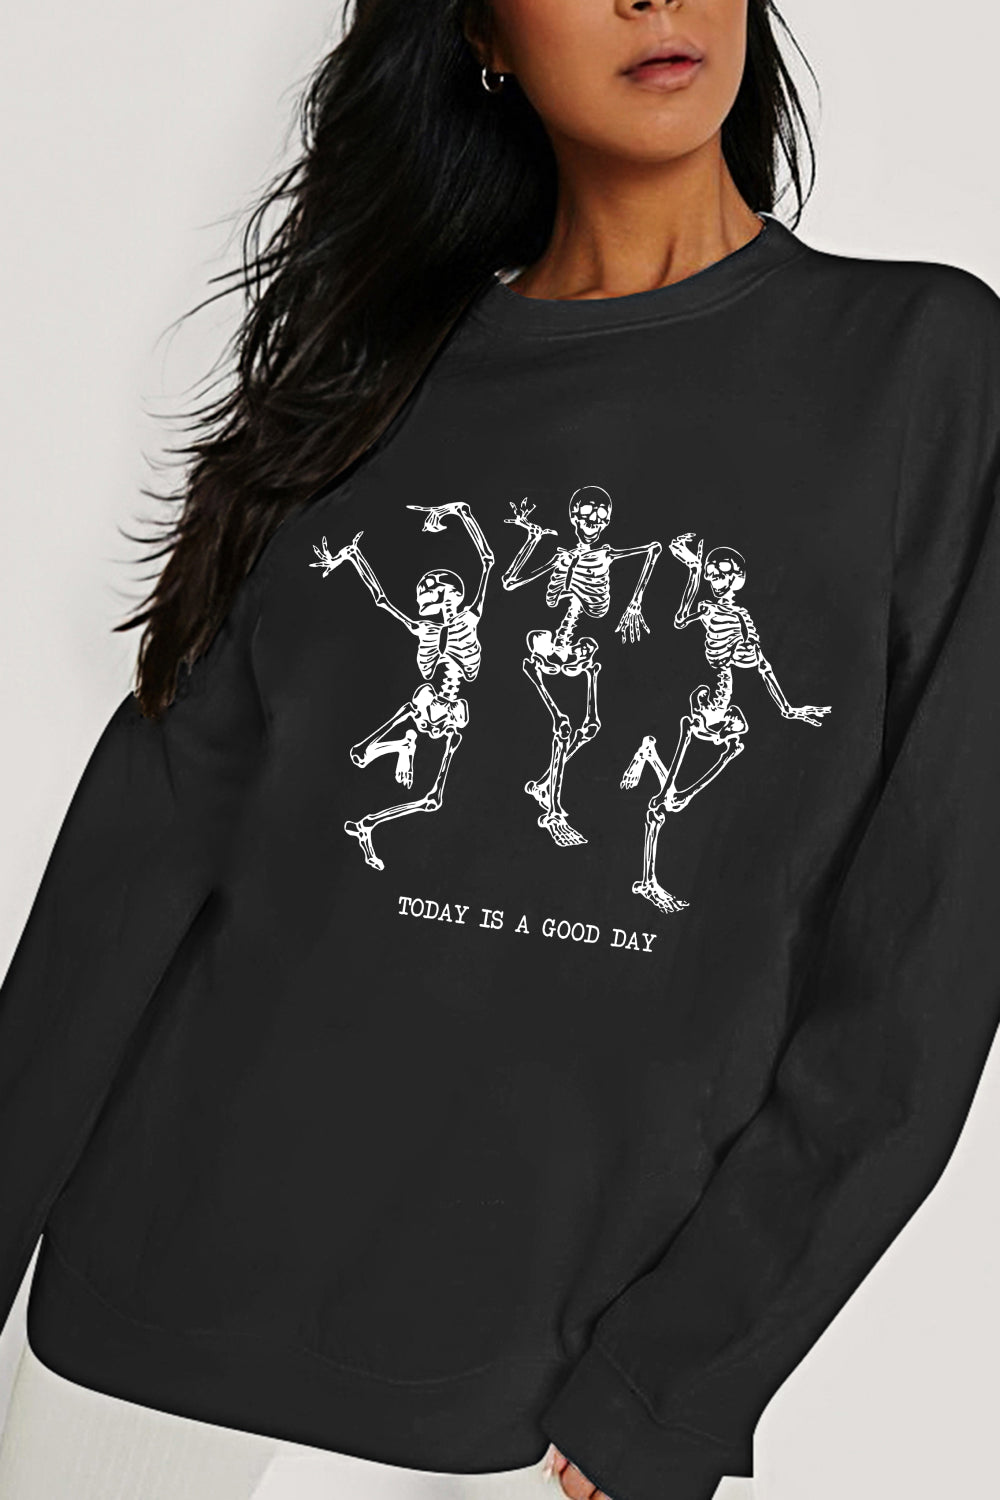 Simply Love Full Size TODAY IS A GOOD DAY Graphic Sweatshirt